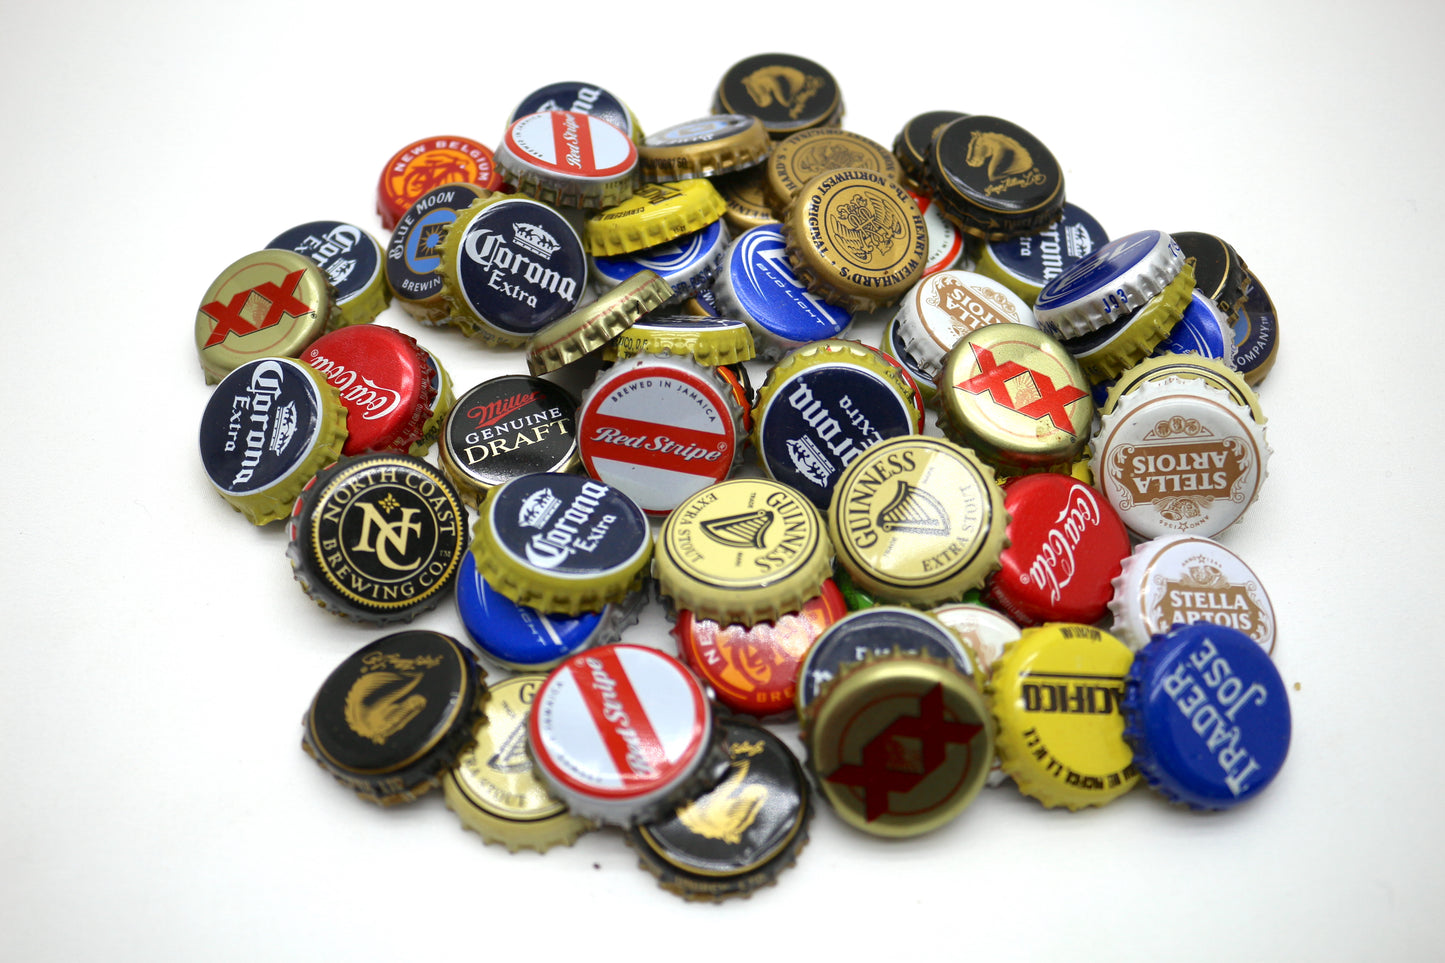 100+ Bulk Beer Bottle caps for art and craft projects, Fallout Party Accessories